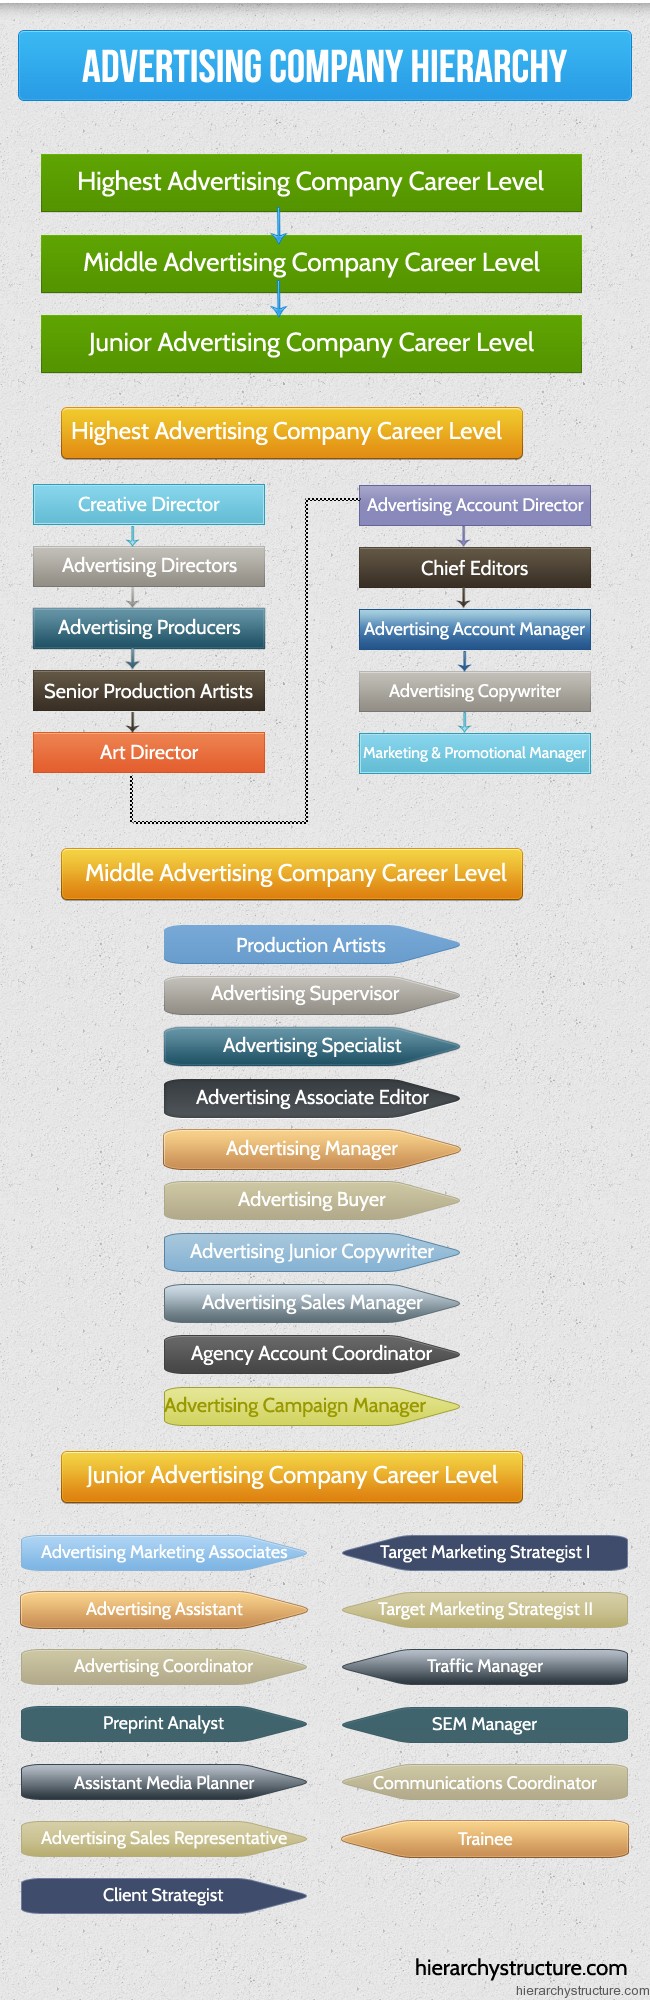 Advertising Company Hierarchy | advertising company structure